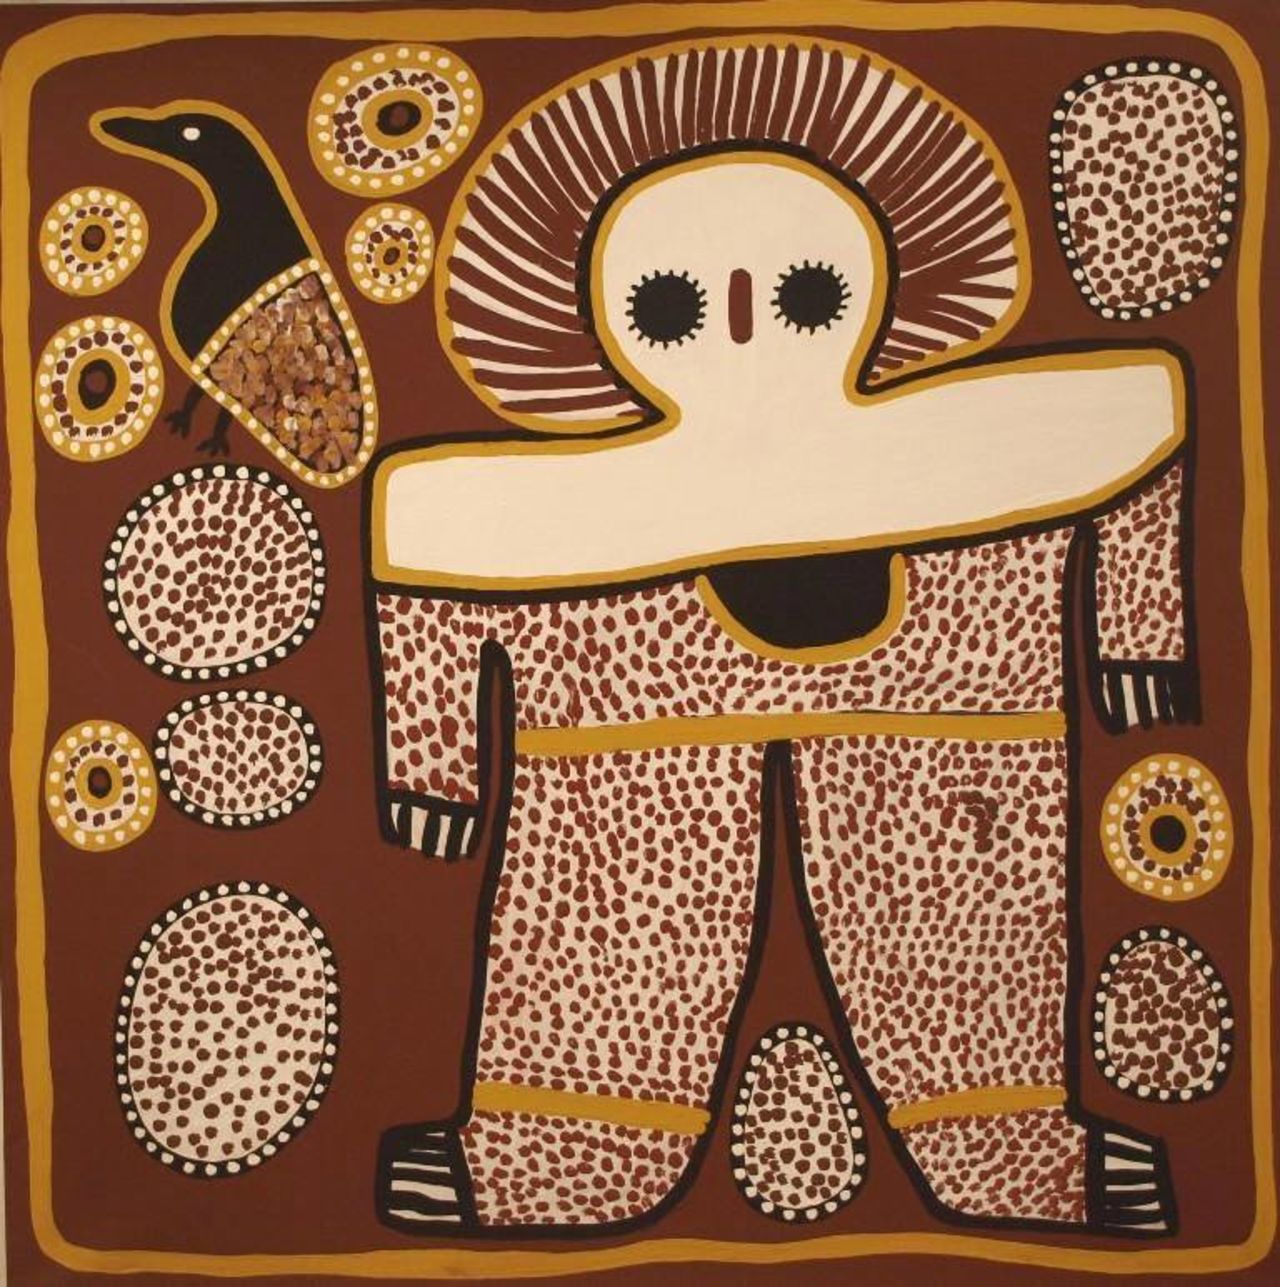 This painting by <a href="http://www.aboriginal-art-australia.com/artworks/lily-karadada-three-wandjina/" target="_blank" target="_blank">Lily Karadada</a> shows the Wandjina -- the supreme spirit being according to the Worrorra, Wunambal and Ngarinyin people of the Kimberley region. The Wandjina have large eyes but no mouth, as it is said this would make them too powerful. Pictured, "Wanjina" by Lily Karadada.